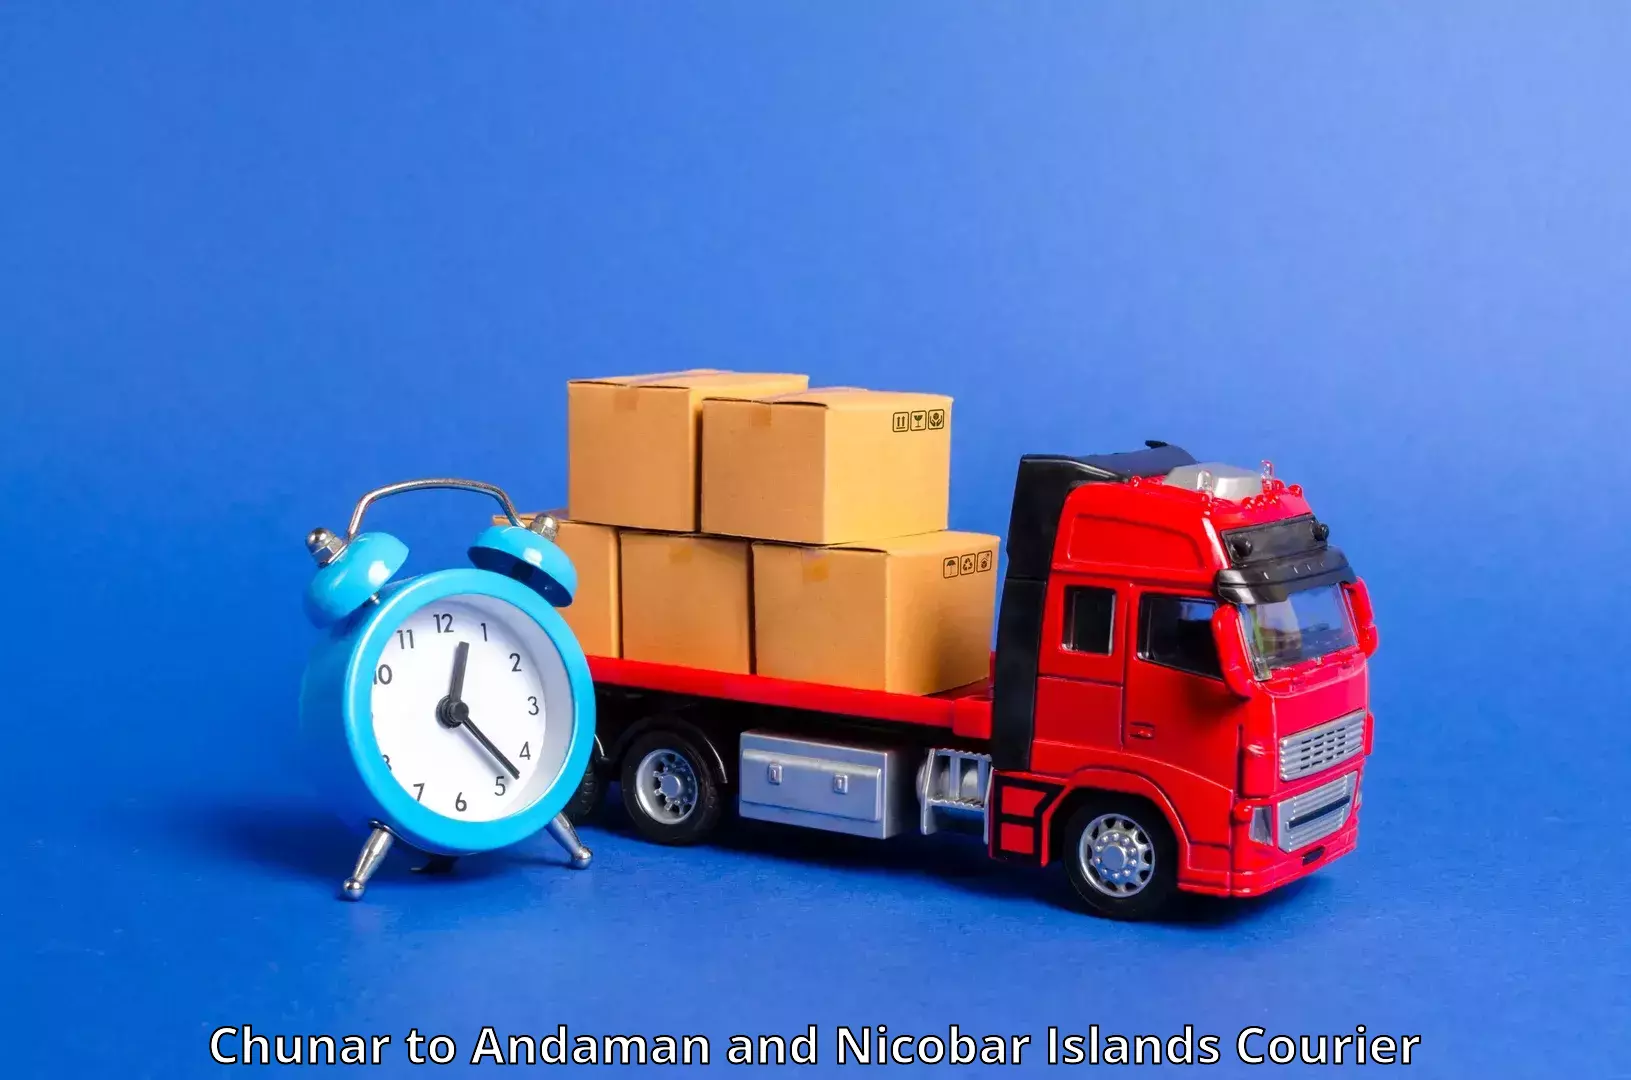 Supply chain efficiency in Chunar to Andaman and Nicobar Islands